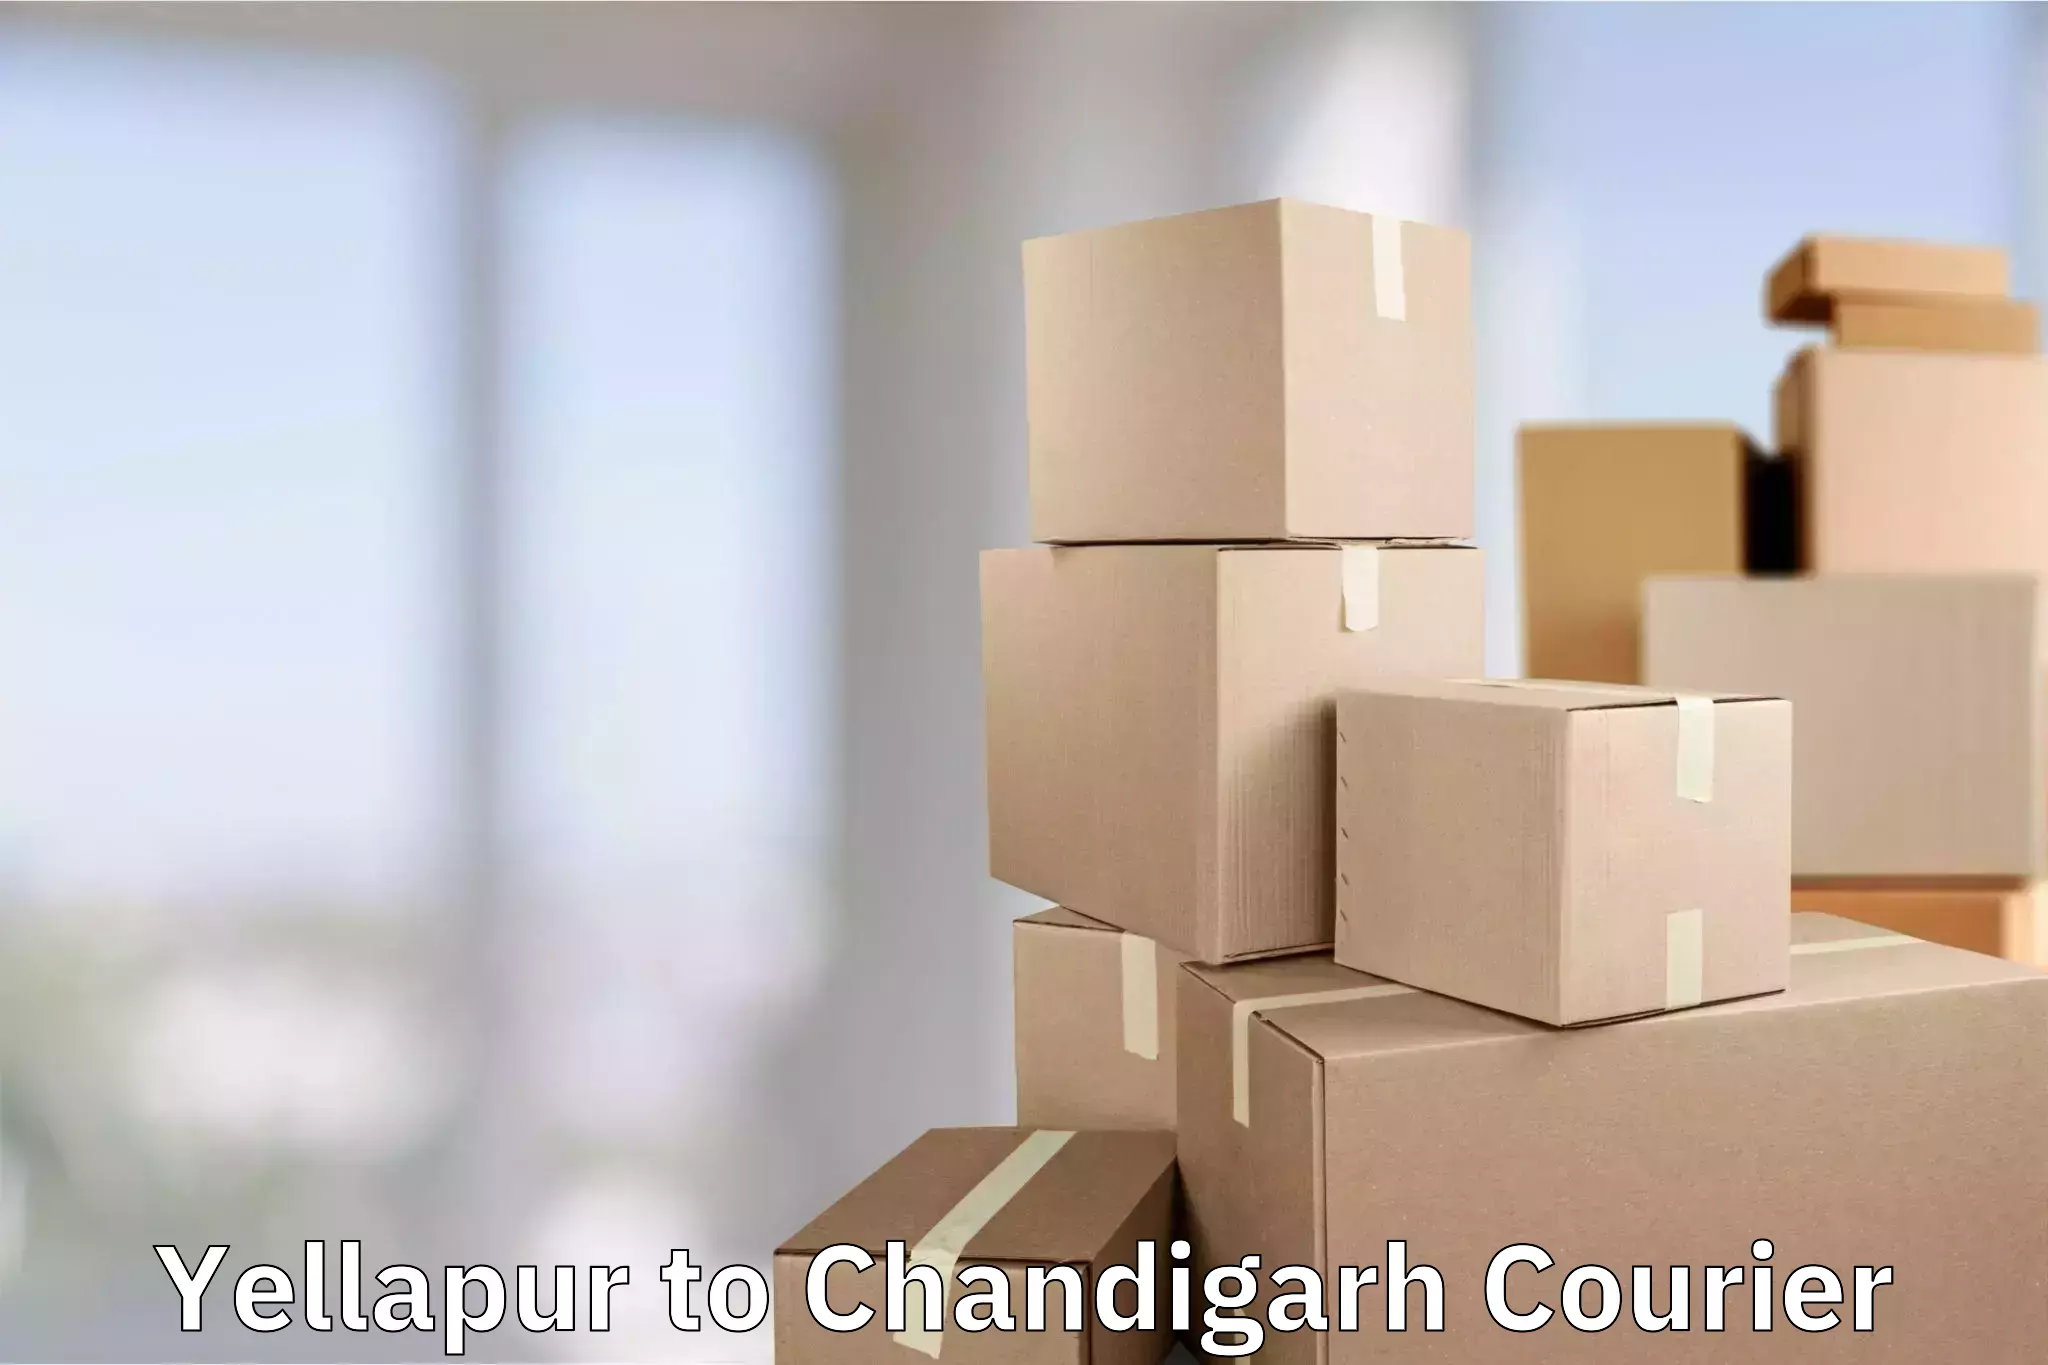 Doorstep luggage collection in Yellapur to Chandigarh